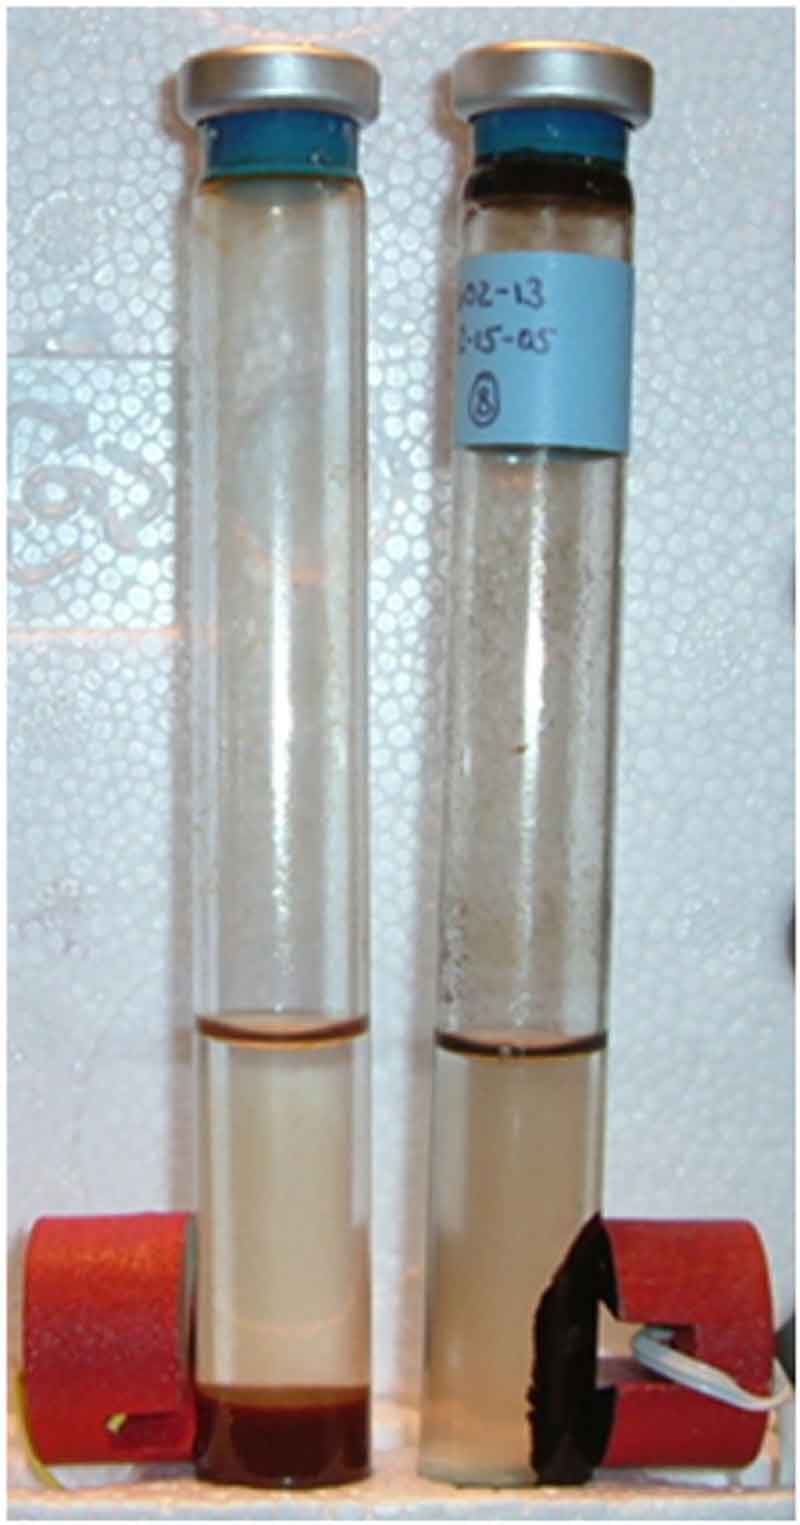 Growth of hyperthermophilic microbes that grow at 203°F (95°C) and convert hydrogen gas, carbon dioxide gas, and iron rust (brown material in left tube) into black magnetic iron (right tube). Red magnets are seen flanking both tubes.